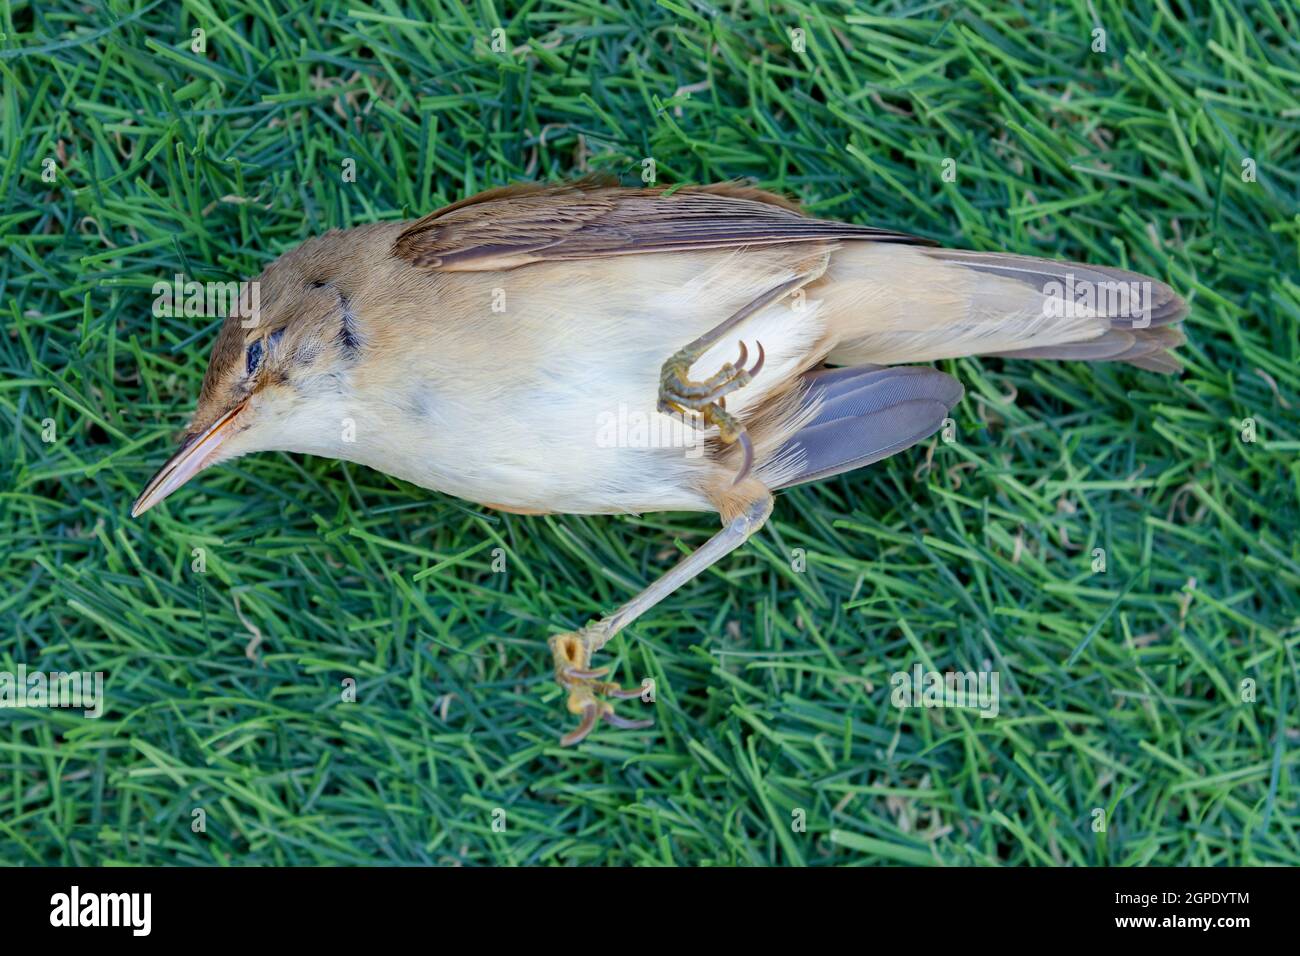 Dead small brown bird on the grass Stock Photo